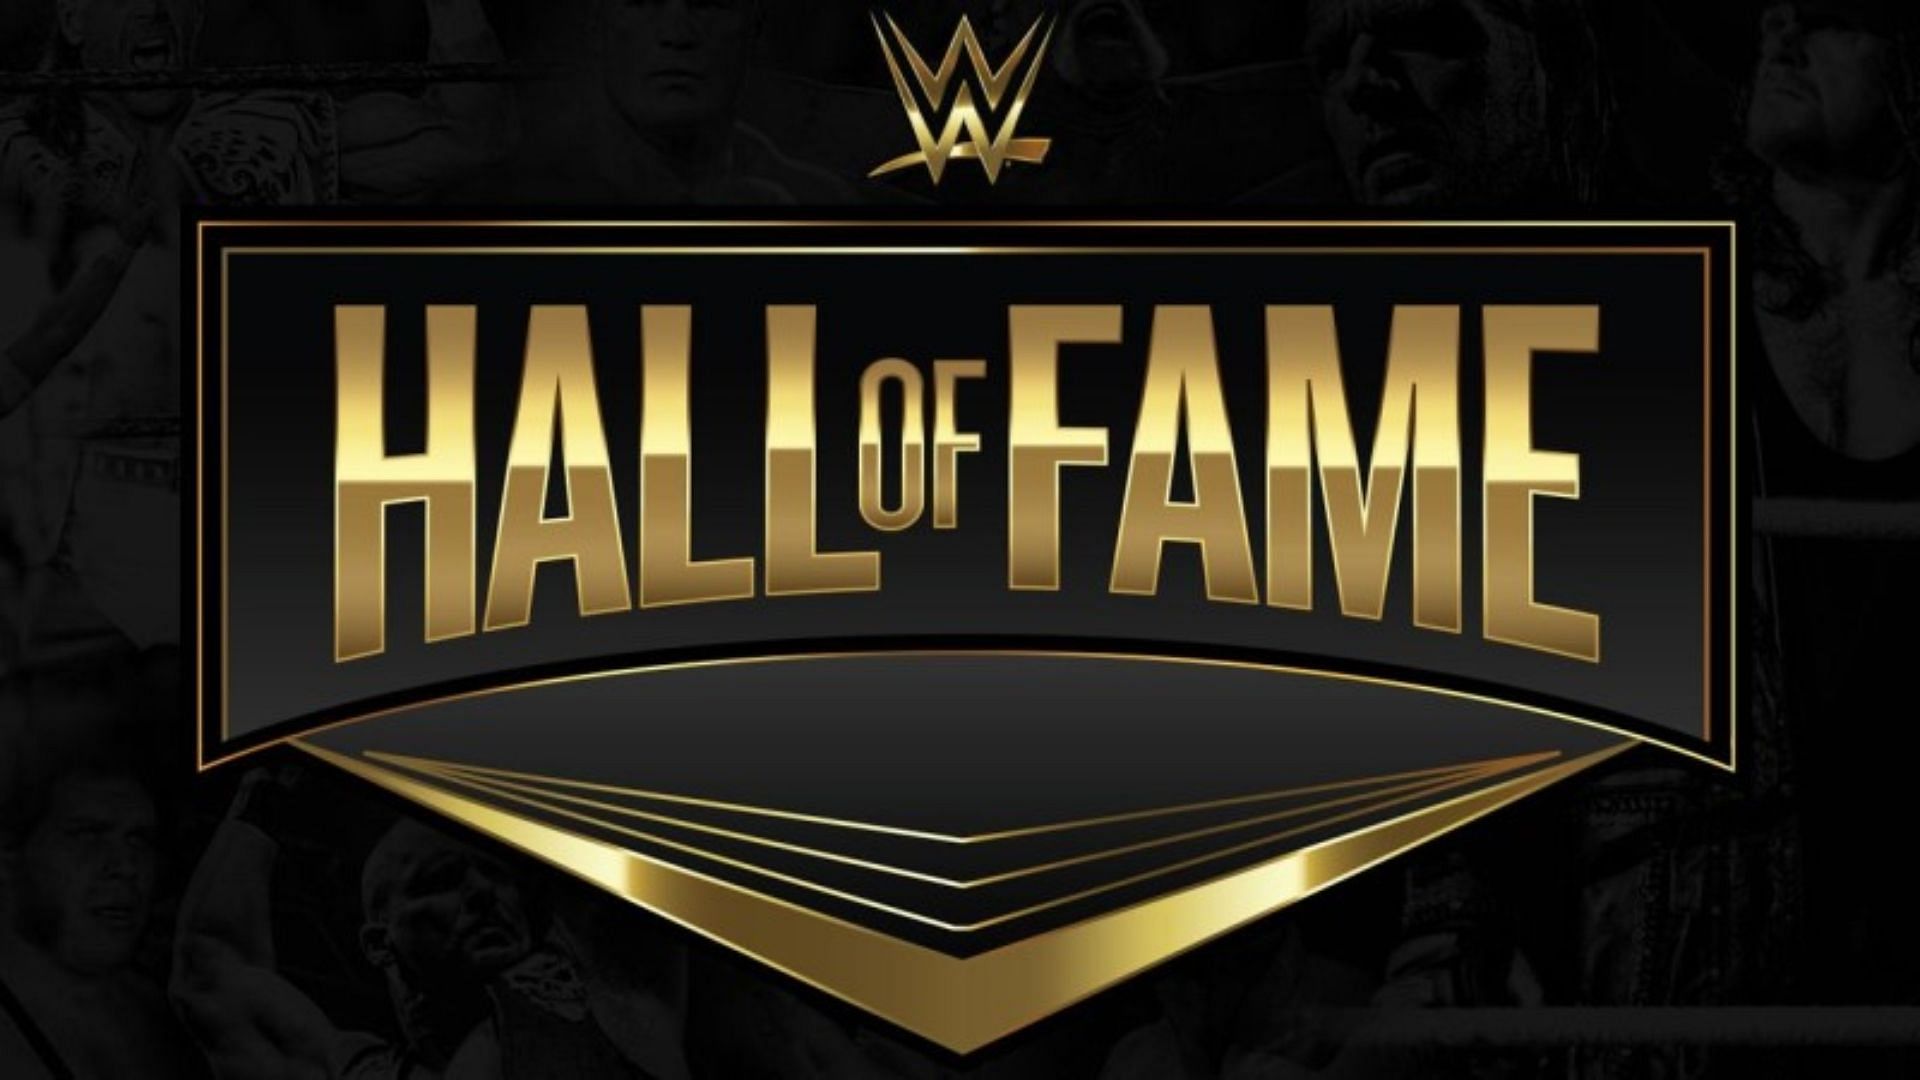 The 2023 WWE Hall of Fame ceremony is set to take place on March 31st.